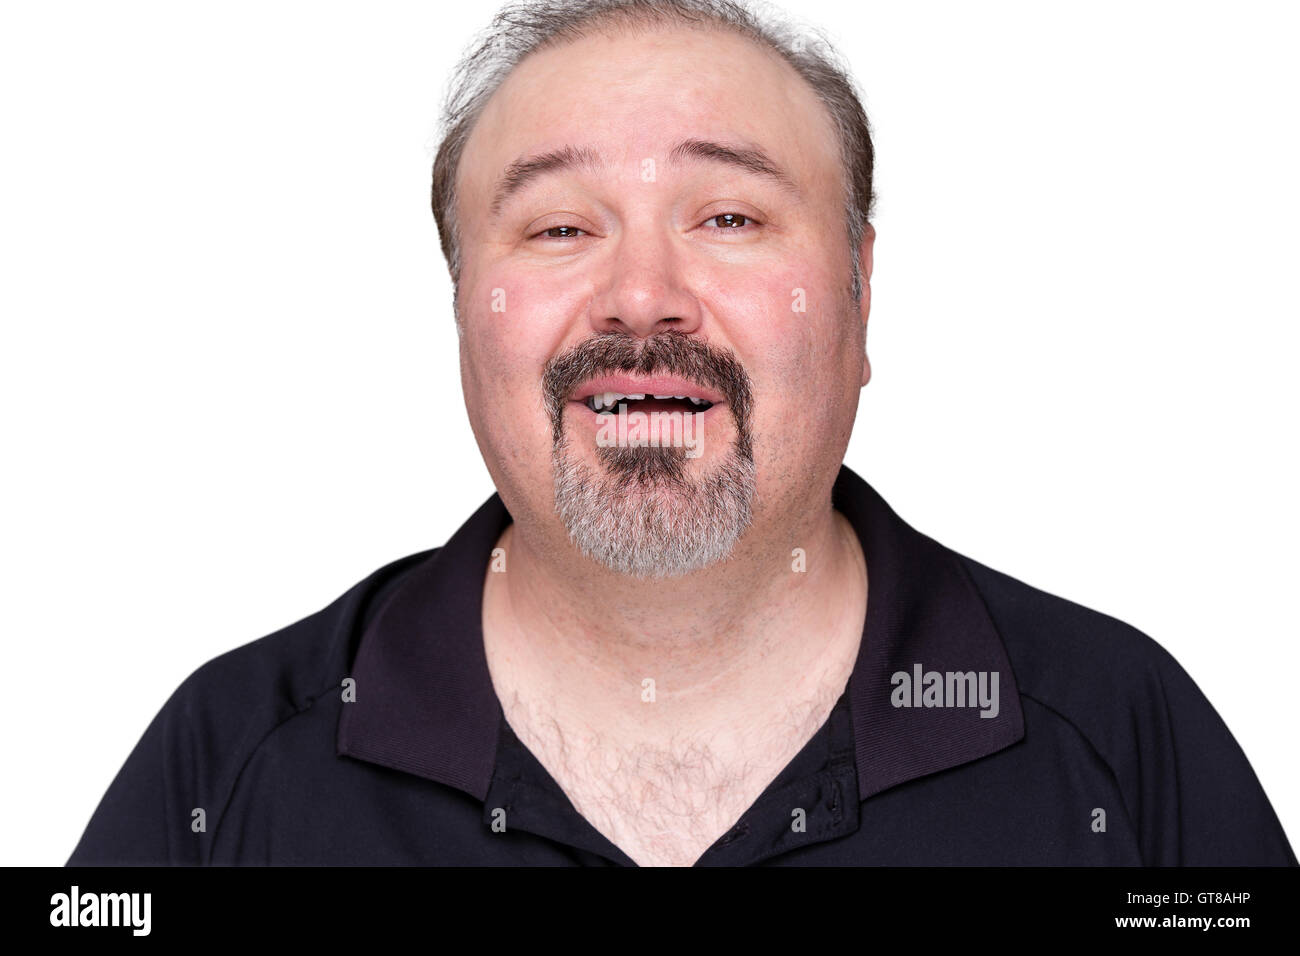 Close up Portrait of a Happy Middle Age Man, Wearing Black Polo Shirt, Looking at the Camera. Isolated on White Background. Stock Photo